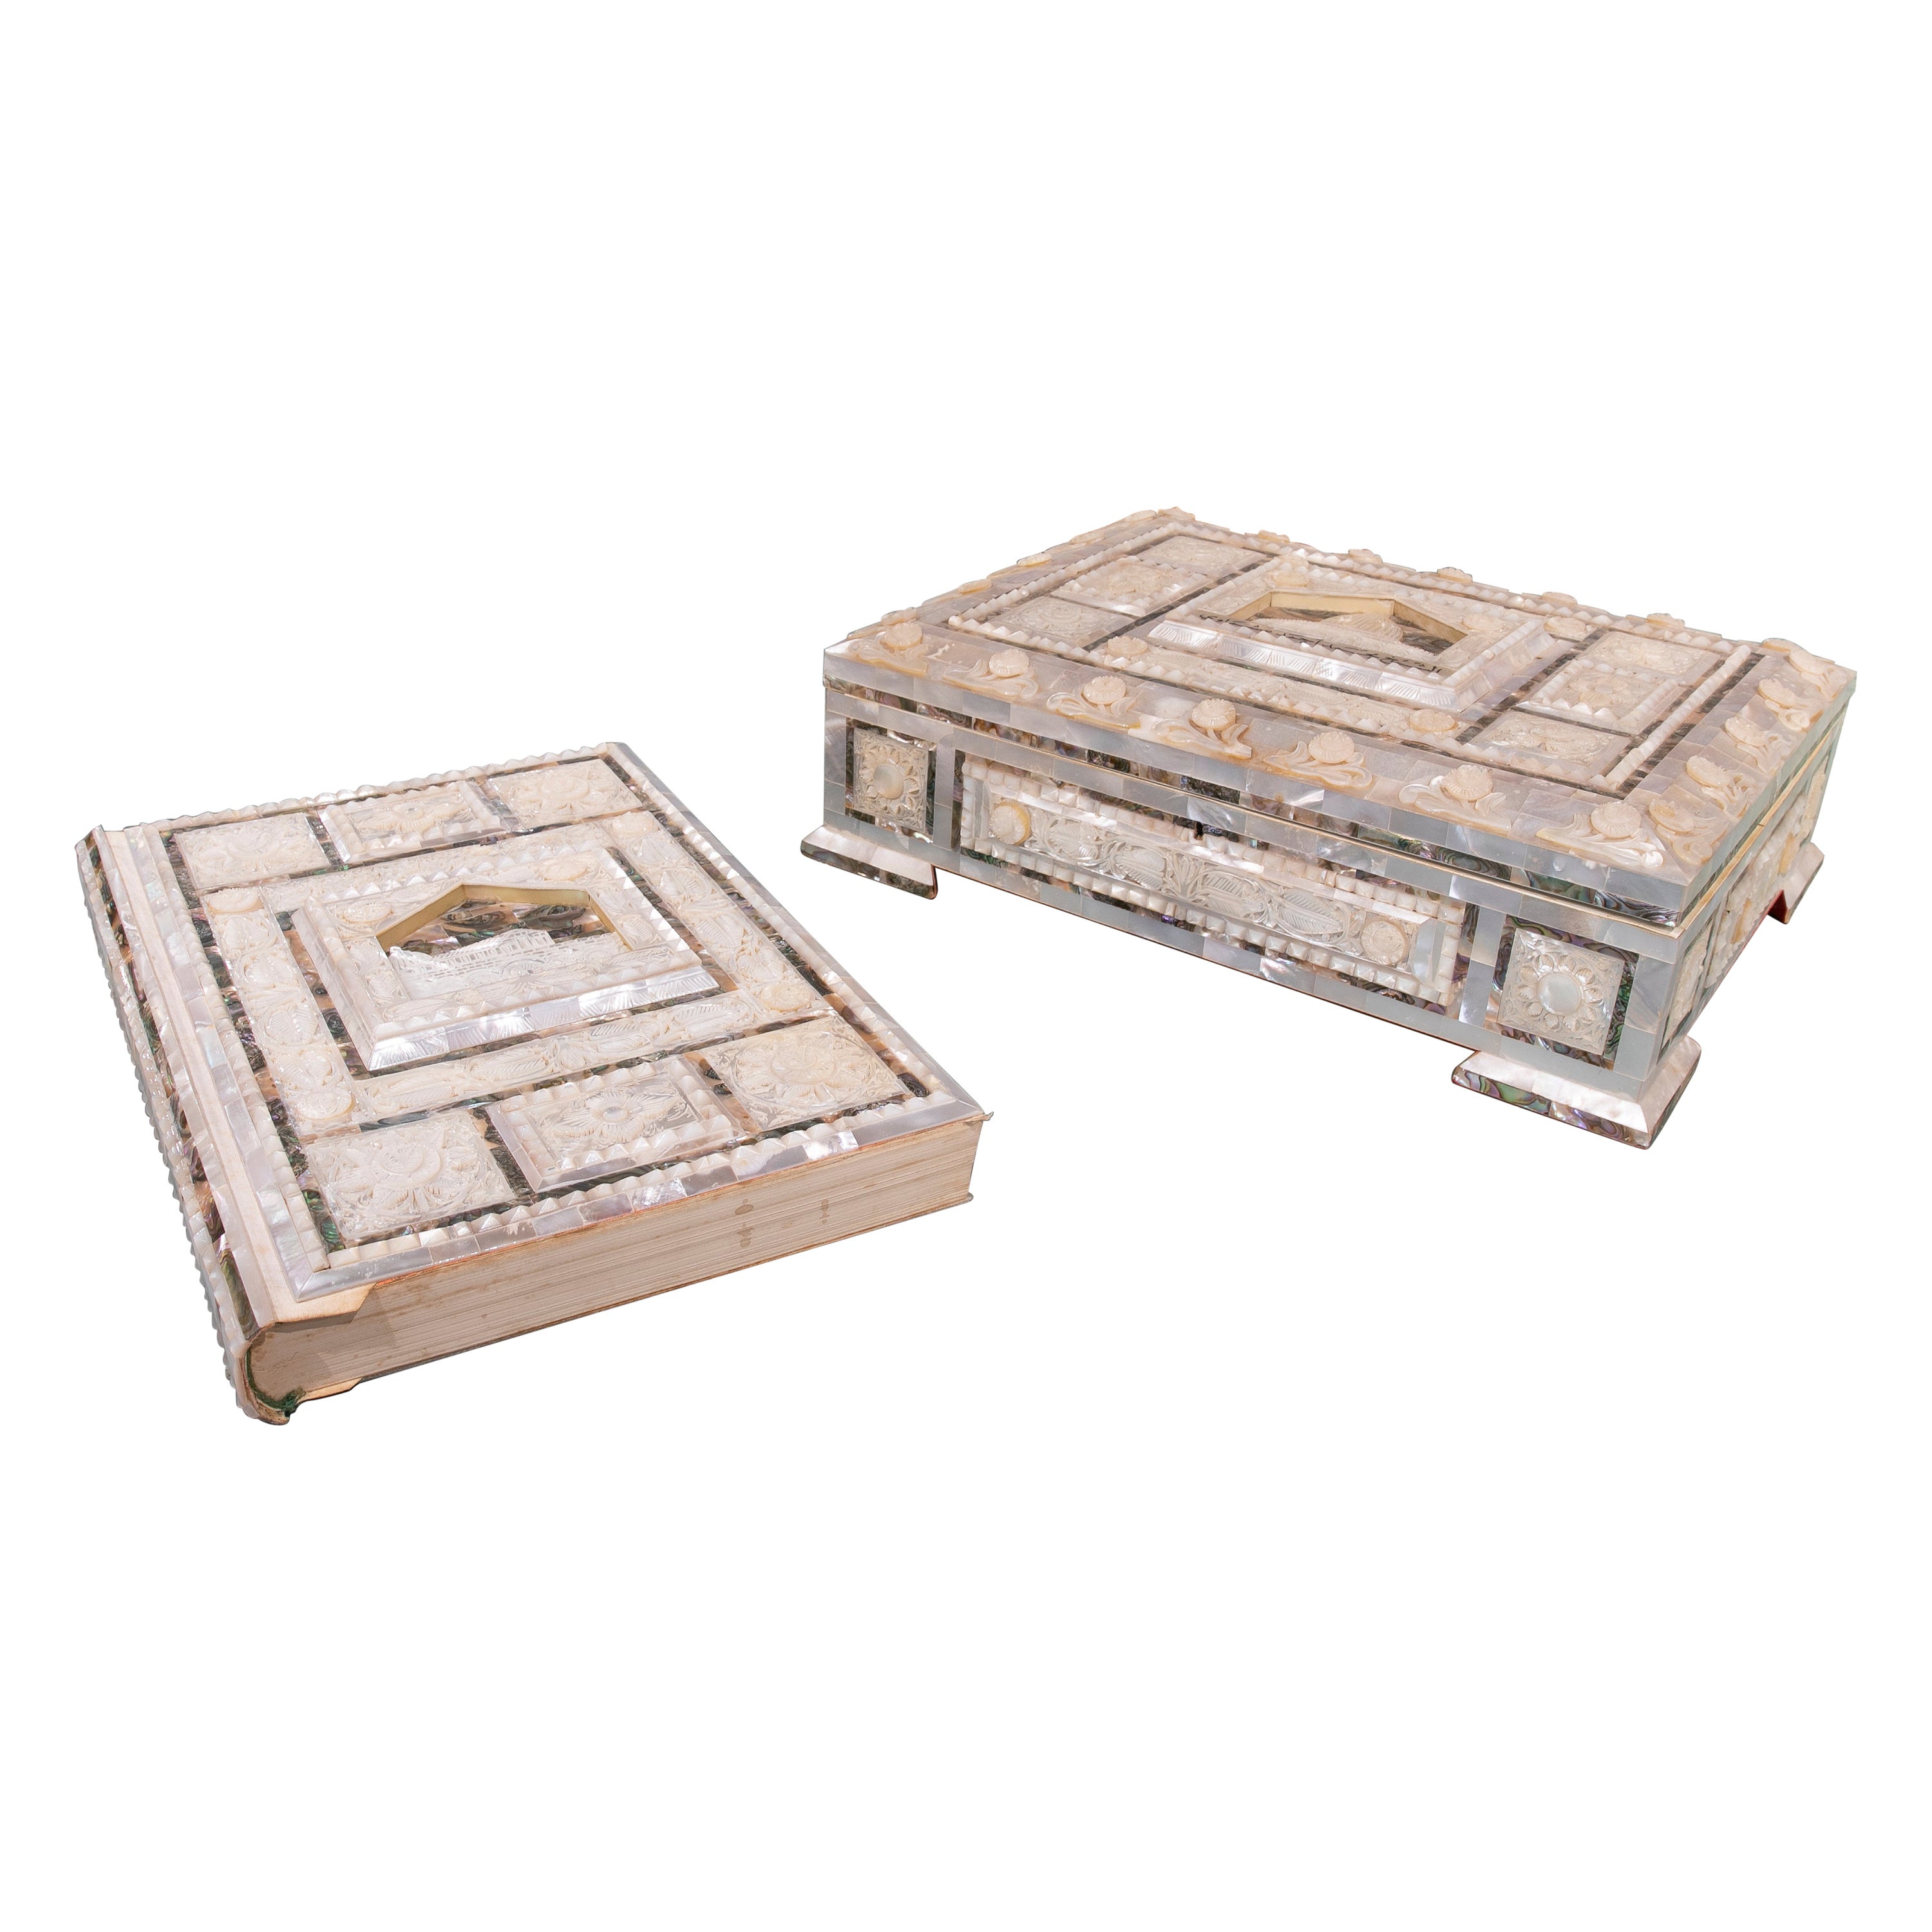 Unique Quran Book with Carved Mother of Pearl Covers and Lockable Box